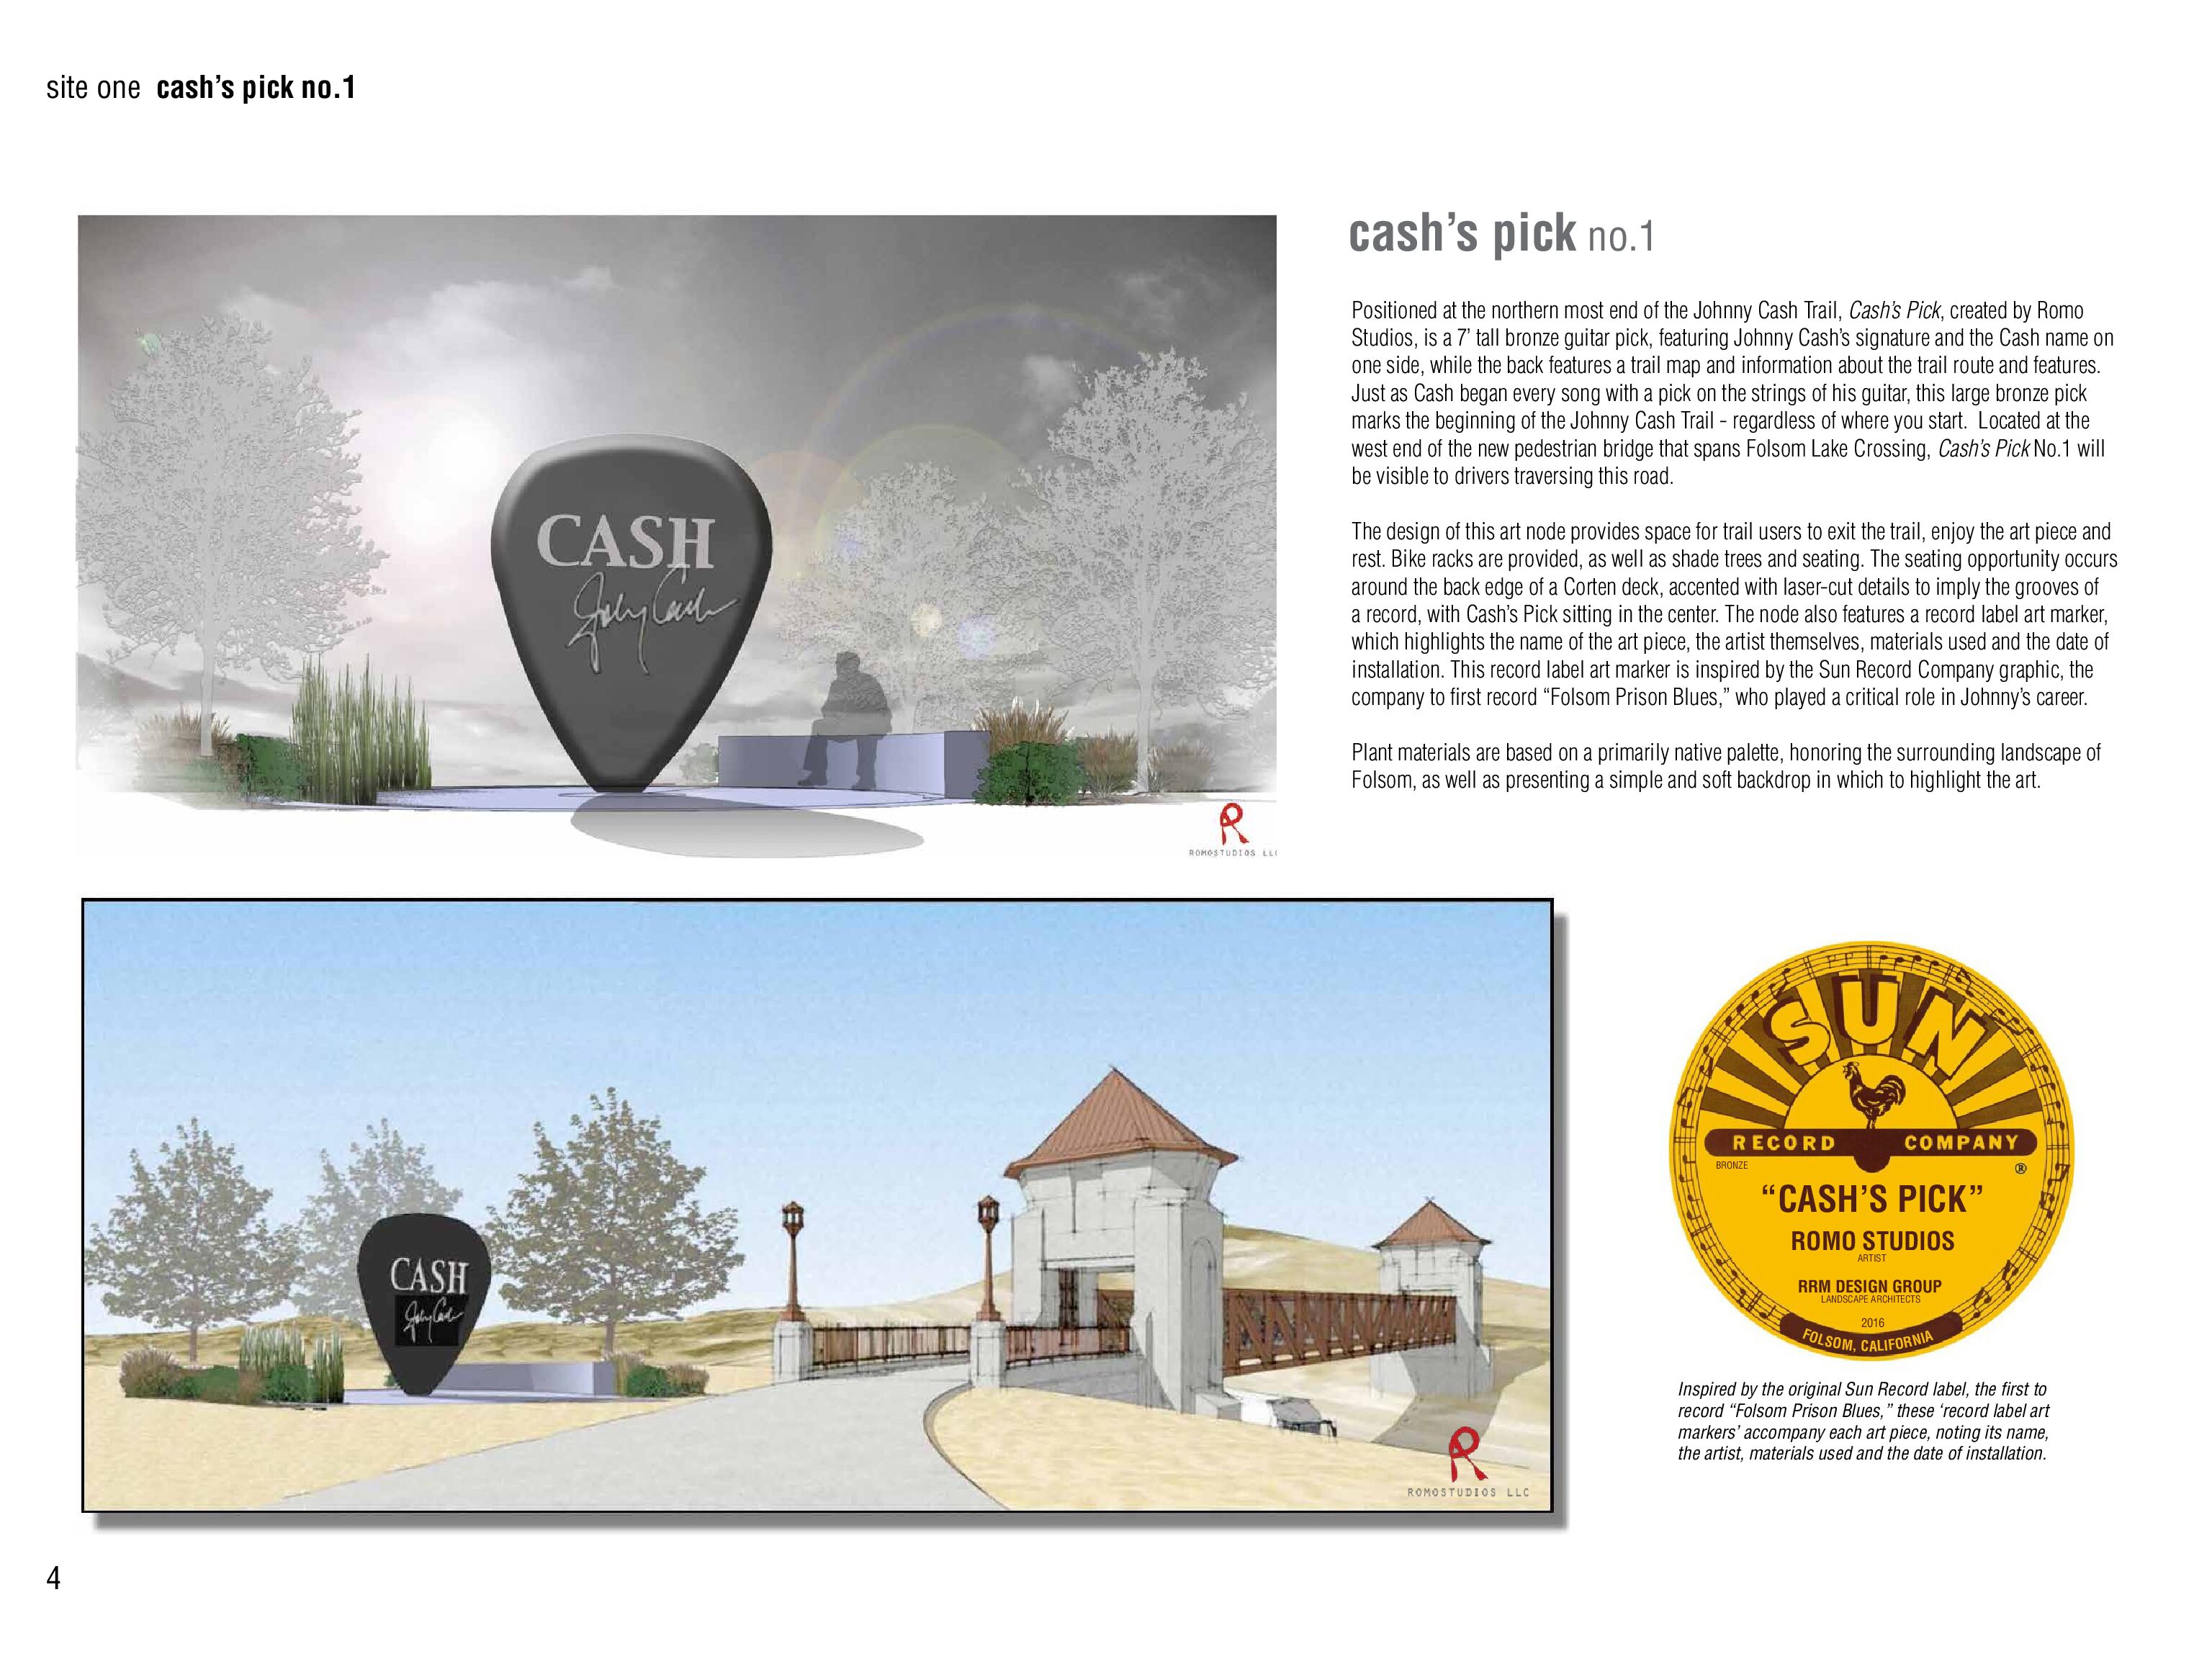 Giant guitar pick ready for Johnny Cash Trail in Folsom